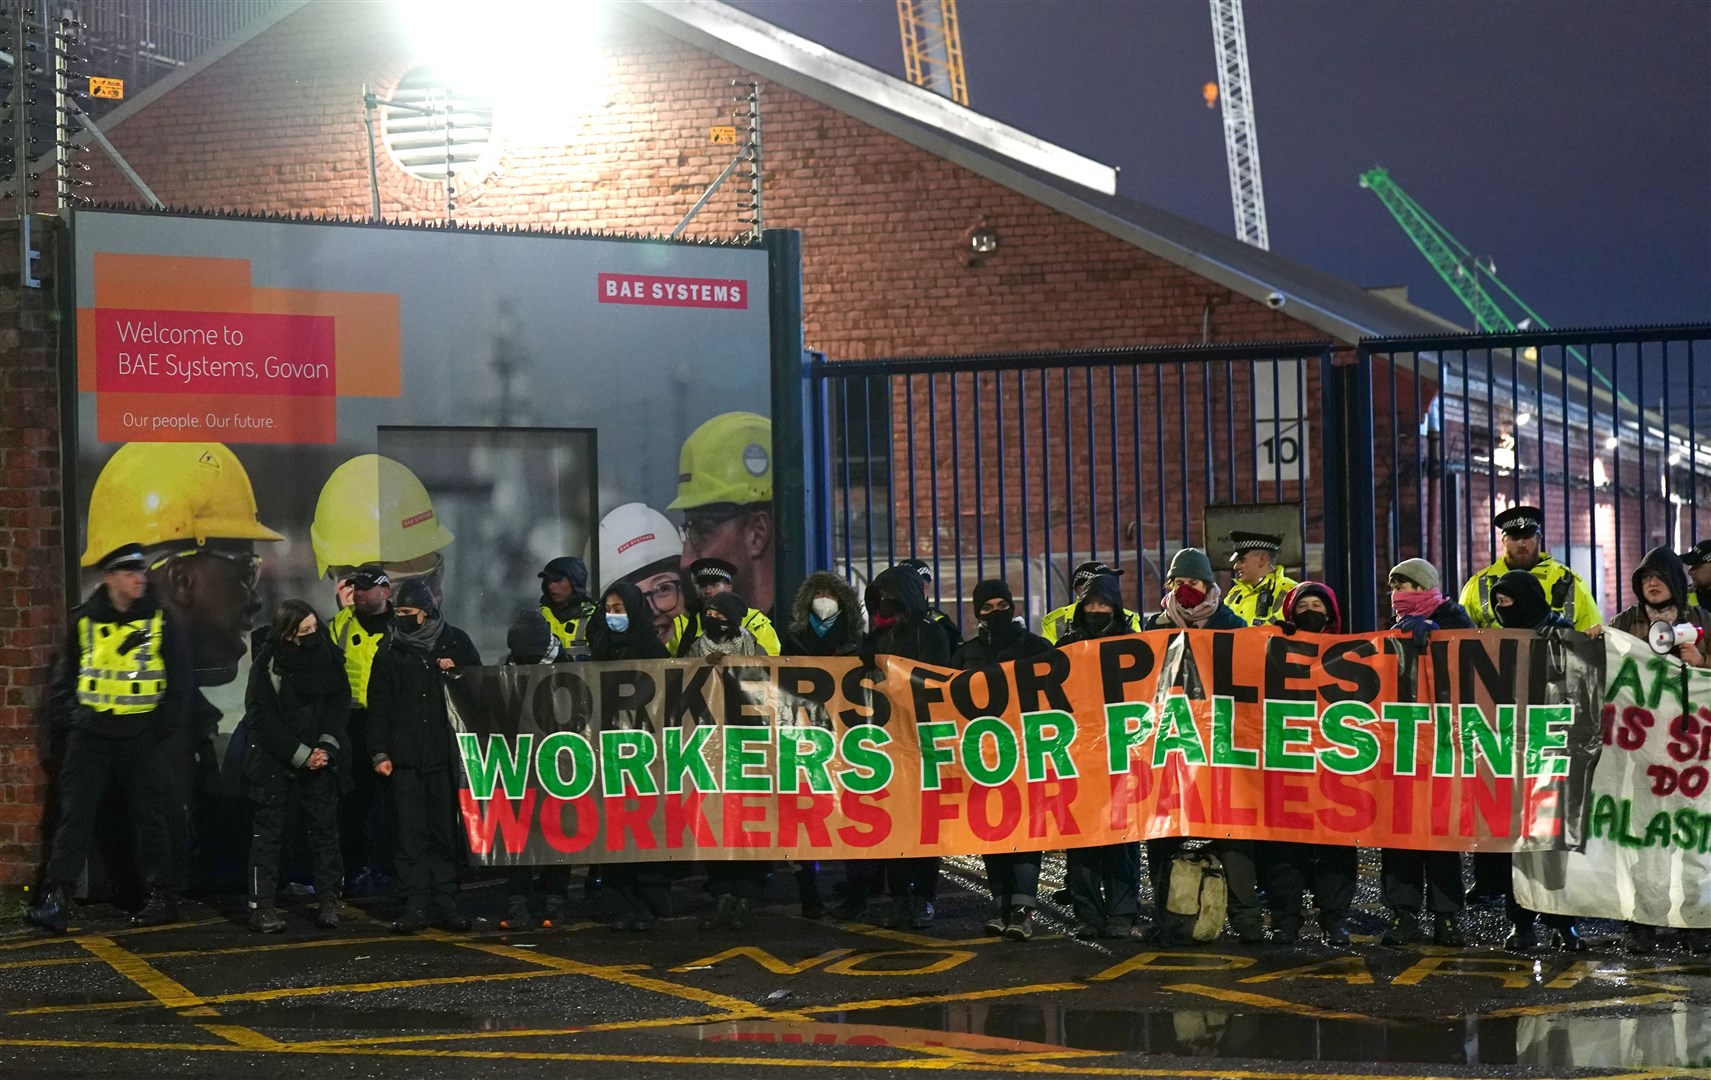 Protesters form a blockade outside BAE Systems in the Govan area of Glasgow (Jane Barlow/PA)